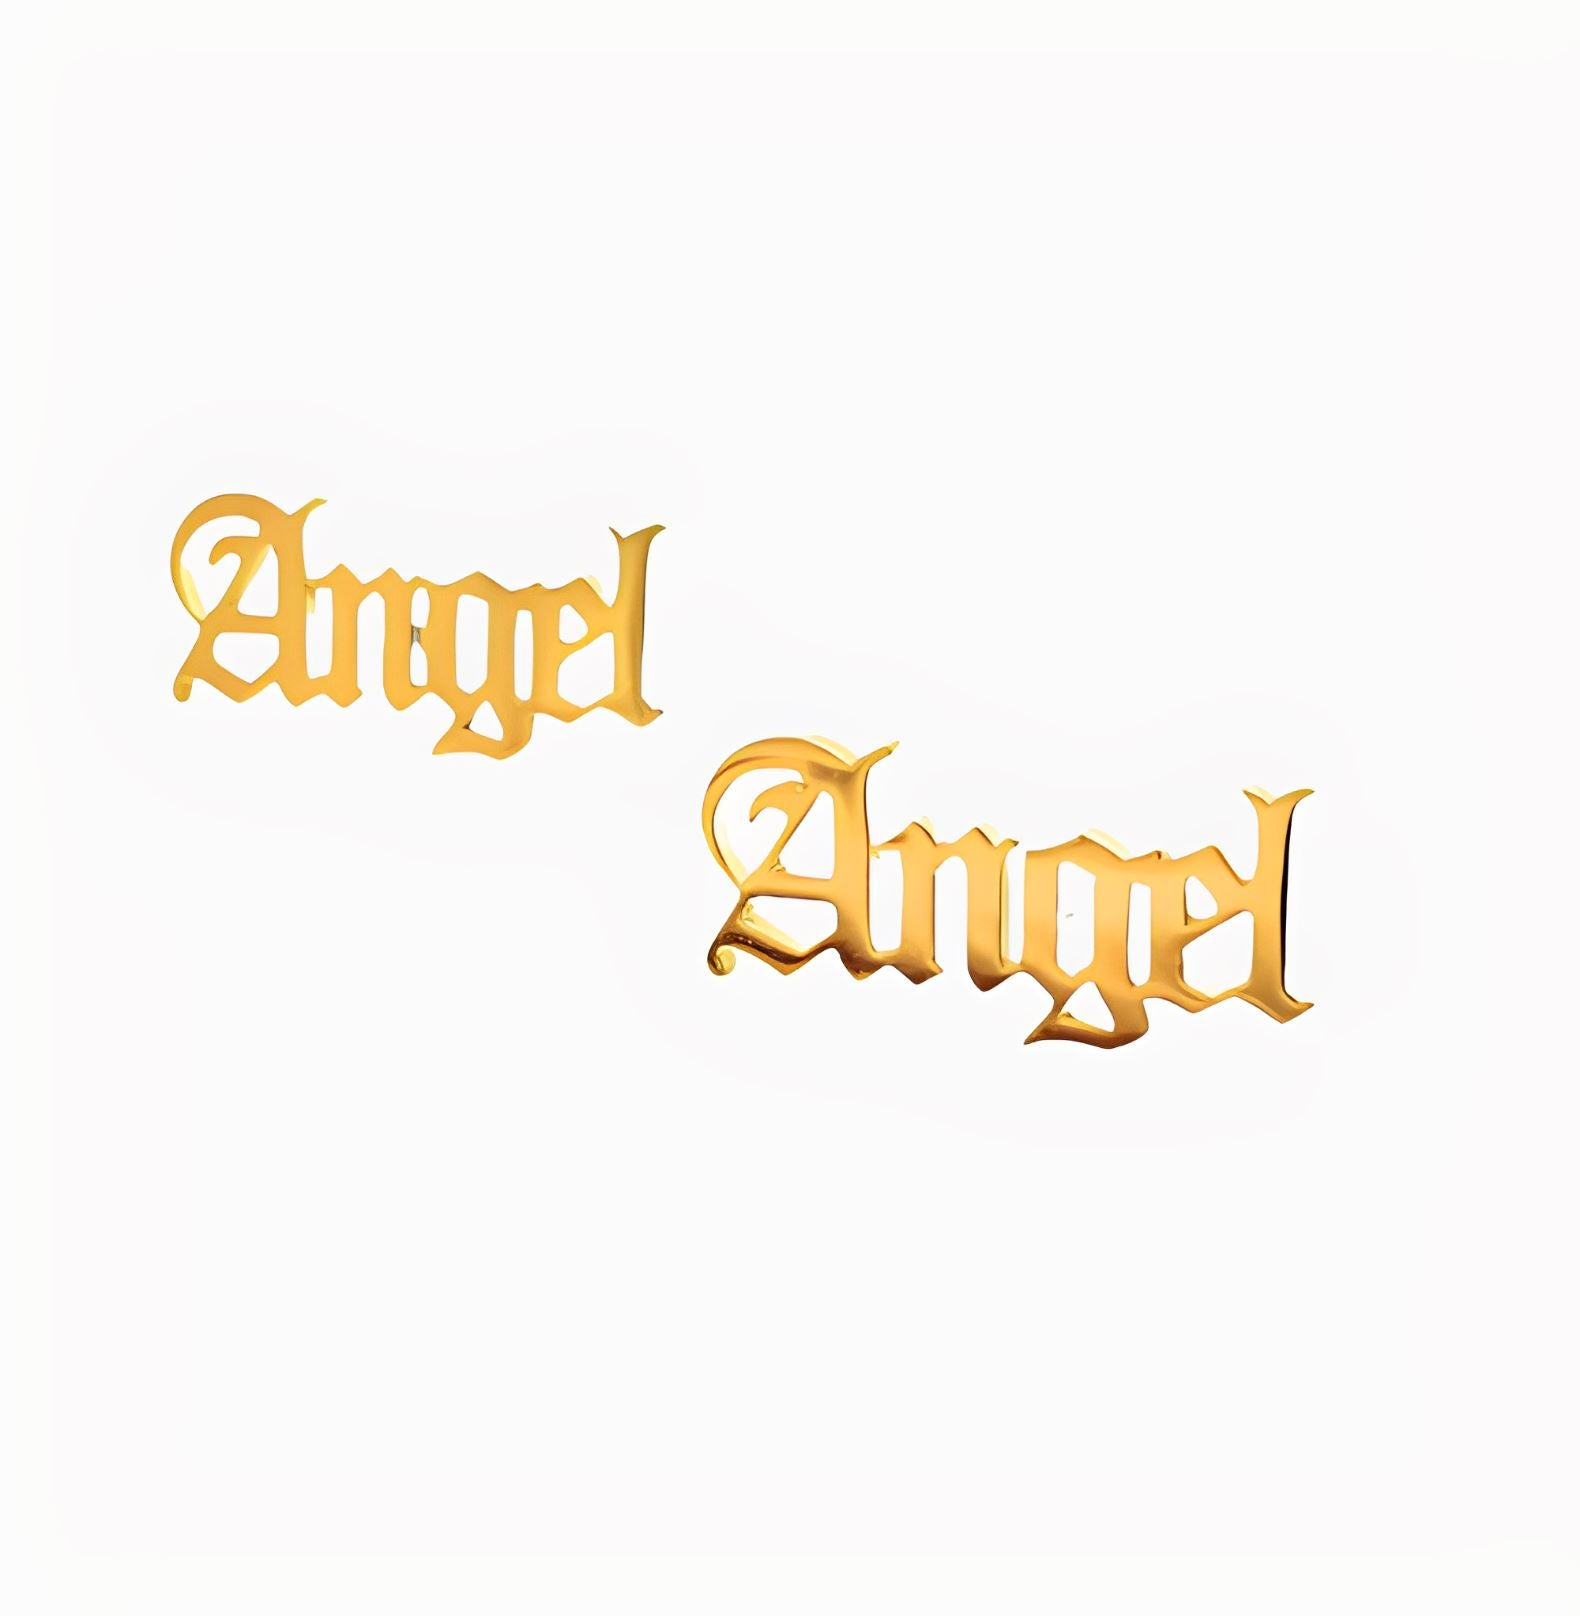 ANGEL STUD EARRING earing Yubama Jewelry Online Store - The Elegant Designs of Gold and Silver ! Gold 